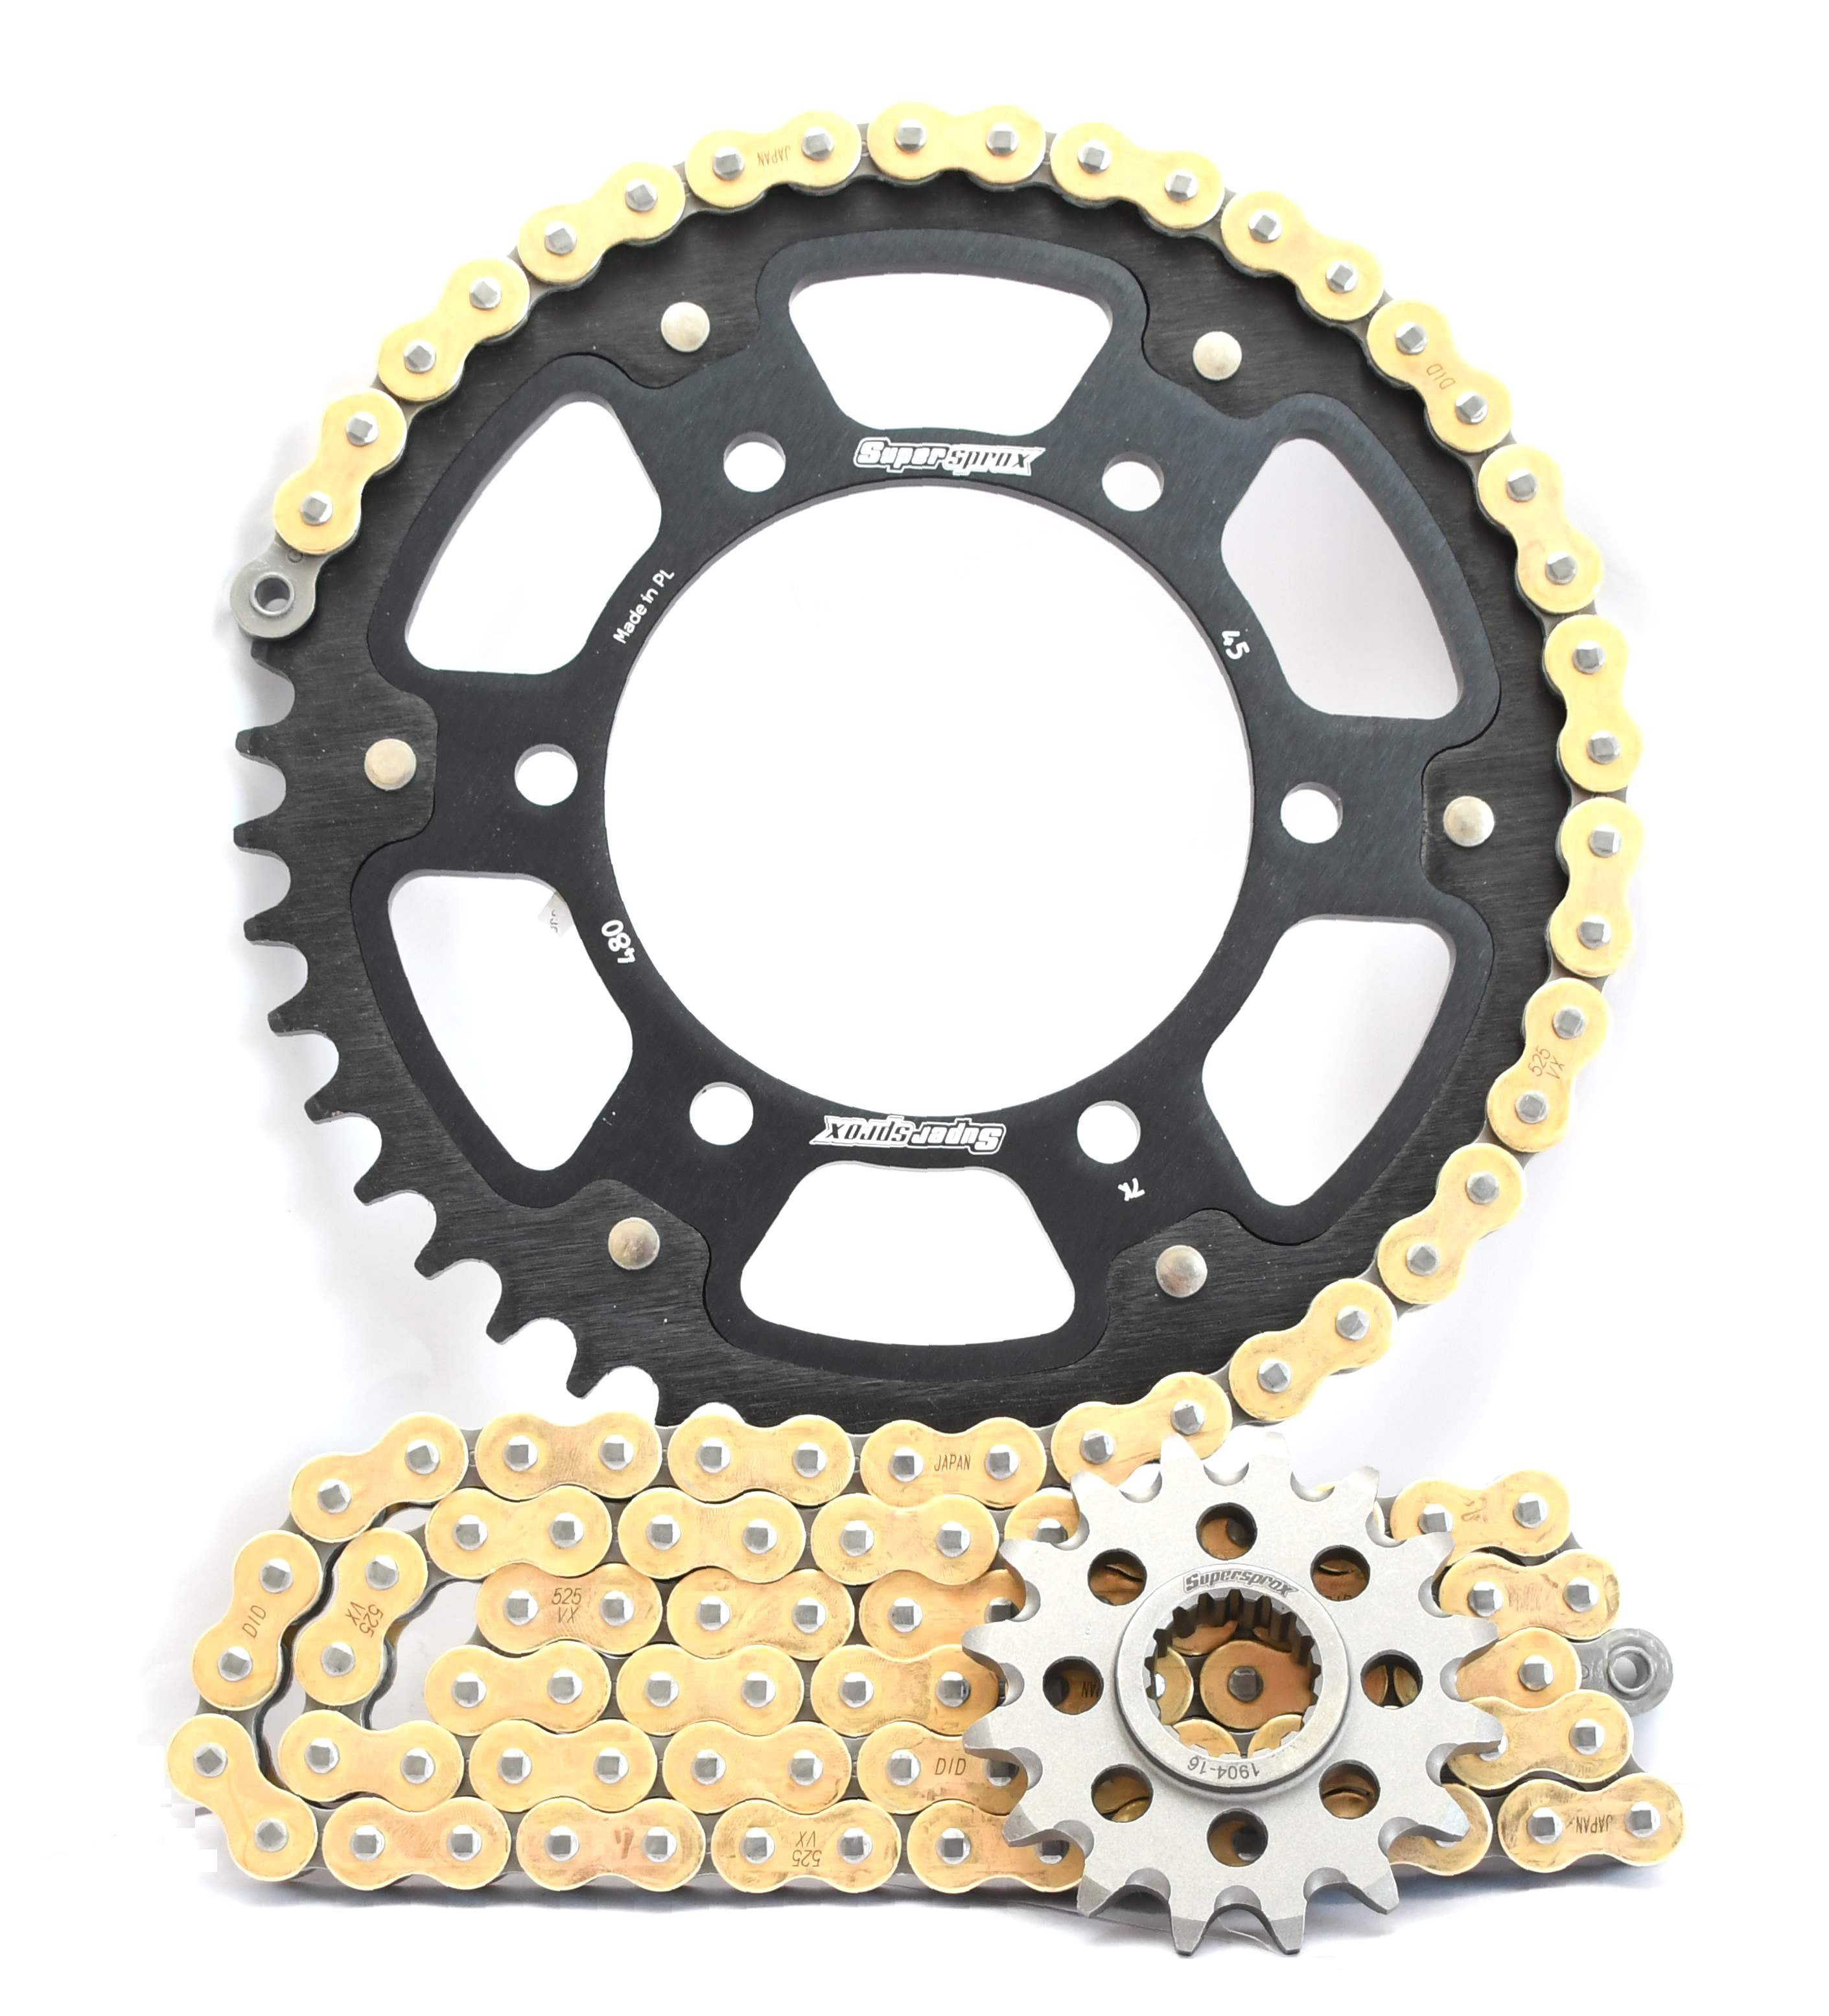 Supersprox Chain & Sprocket Kit for Yamaha YZF R1 1998-2003 - Standard Gearing